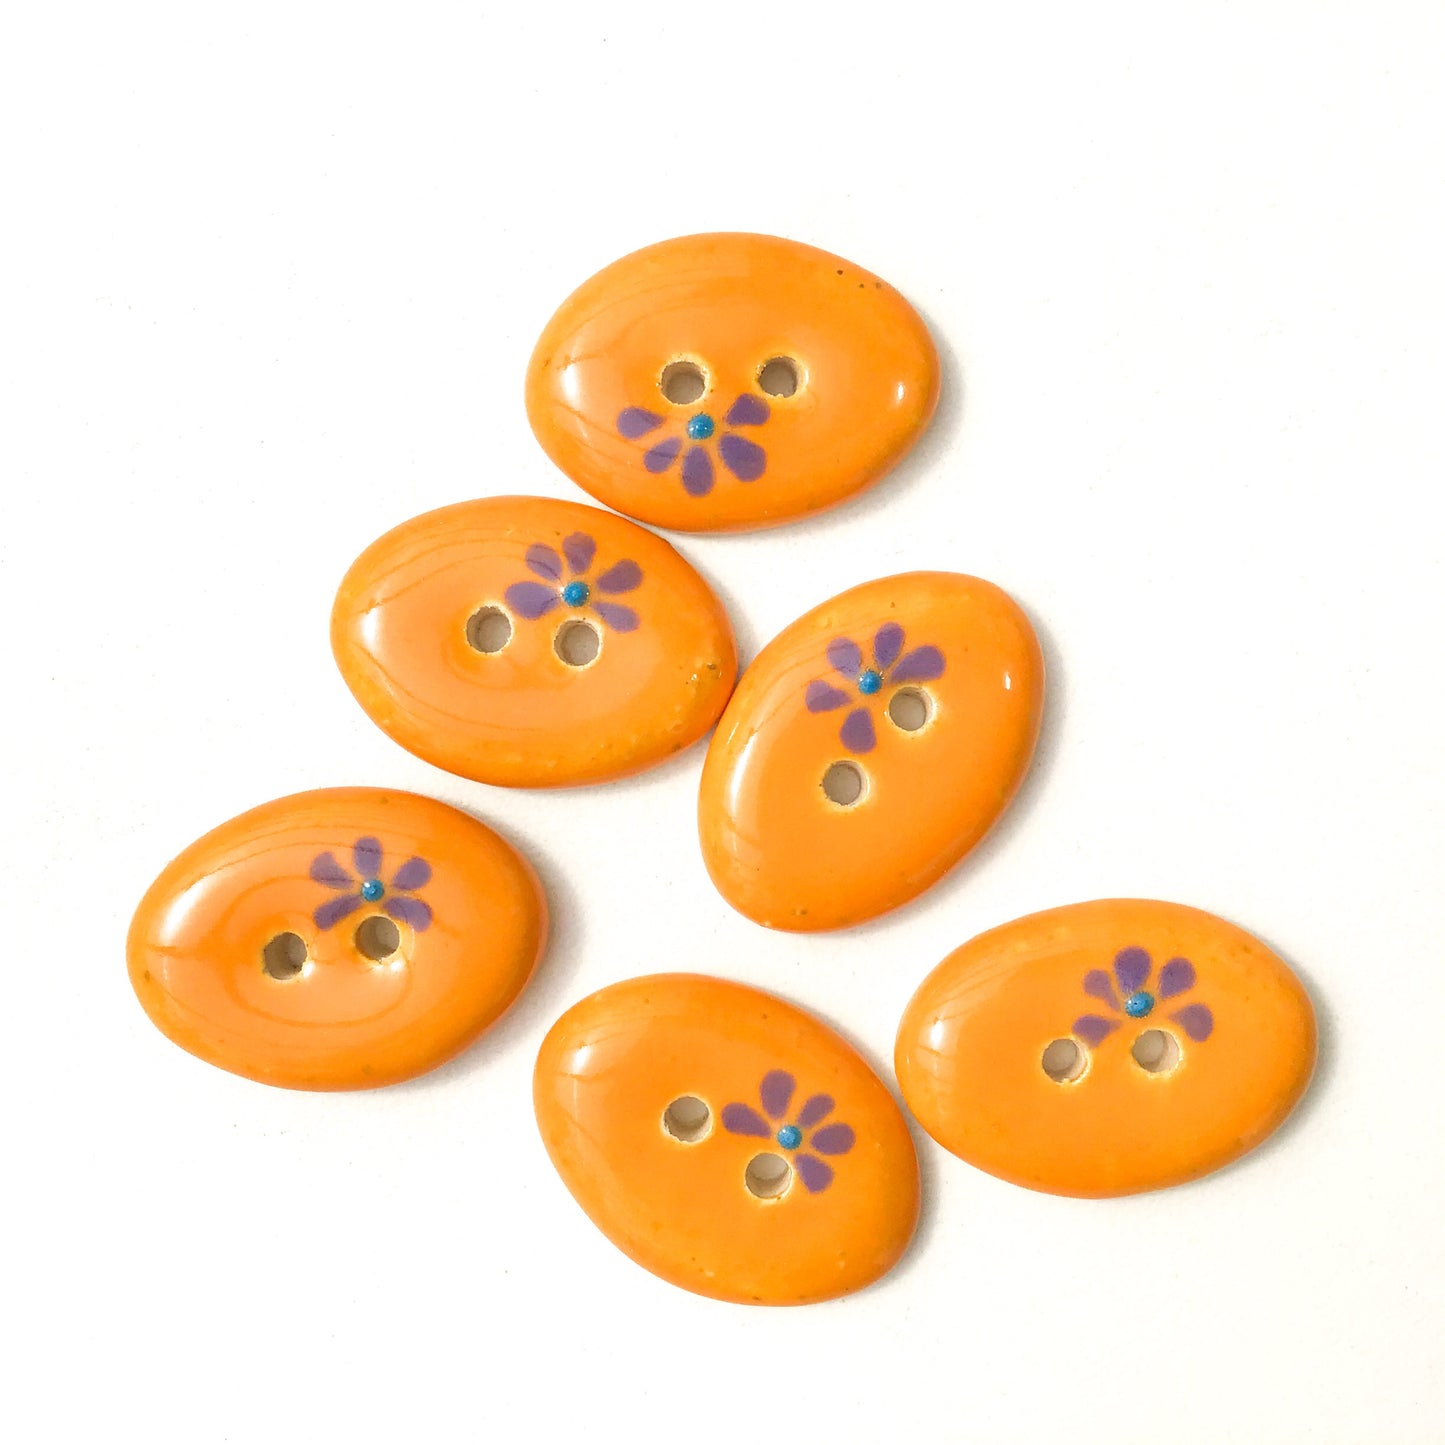 Decorative Oval Ceramic Buttons - Orange Clay Buttons with Purple Flowers - 5/8" x 7/8" - 6 Pack